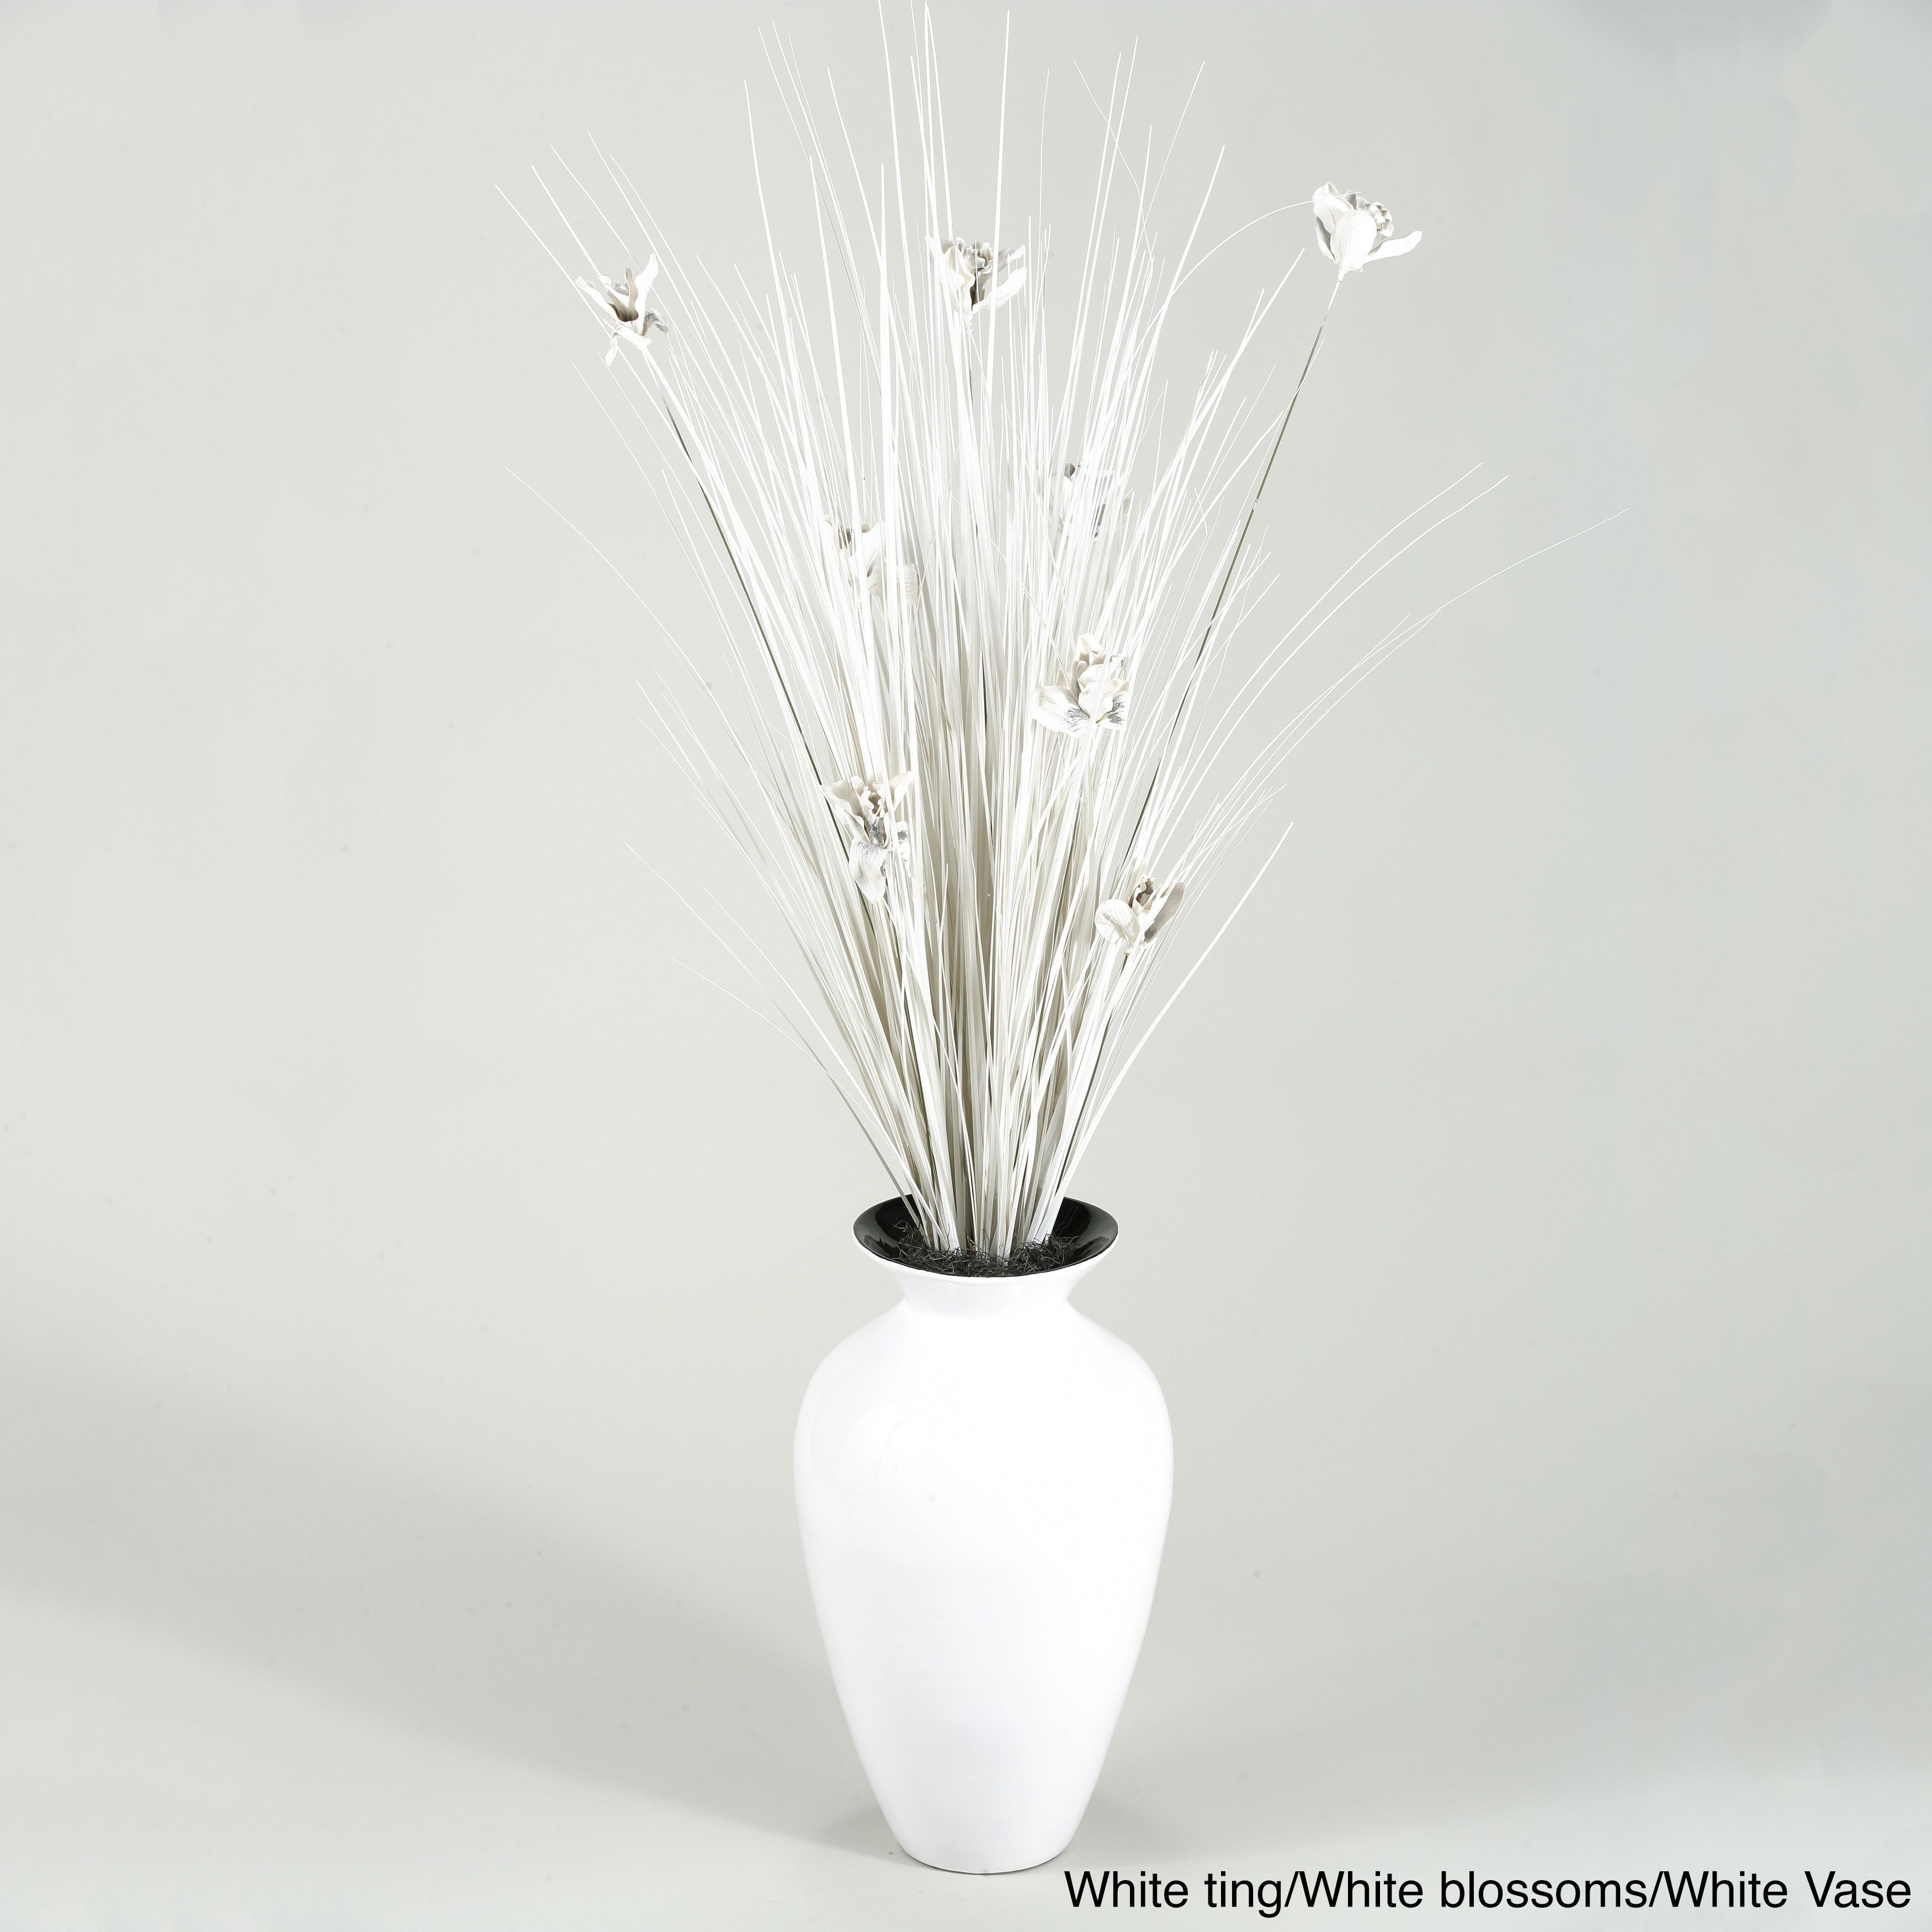 22 Fashionable Bamboo Vase 2022 free download bamboo vase of blossoms in bamboo green vase black ting with red blossoms in for dw silks blossoms in bamboo green vase white ting with white blossoms in white vase